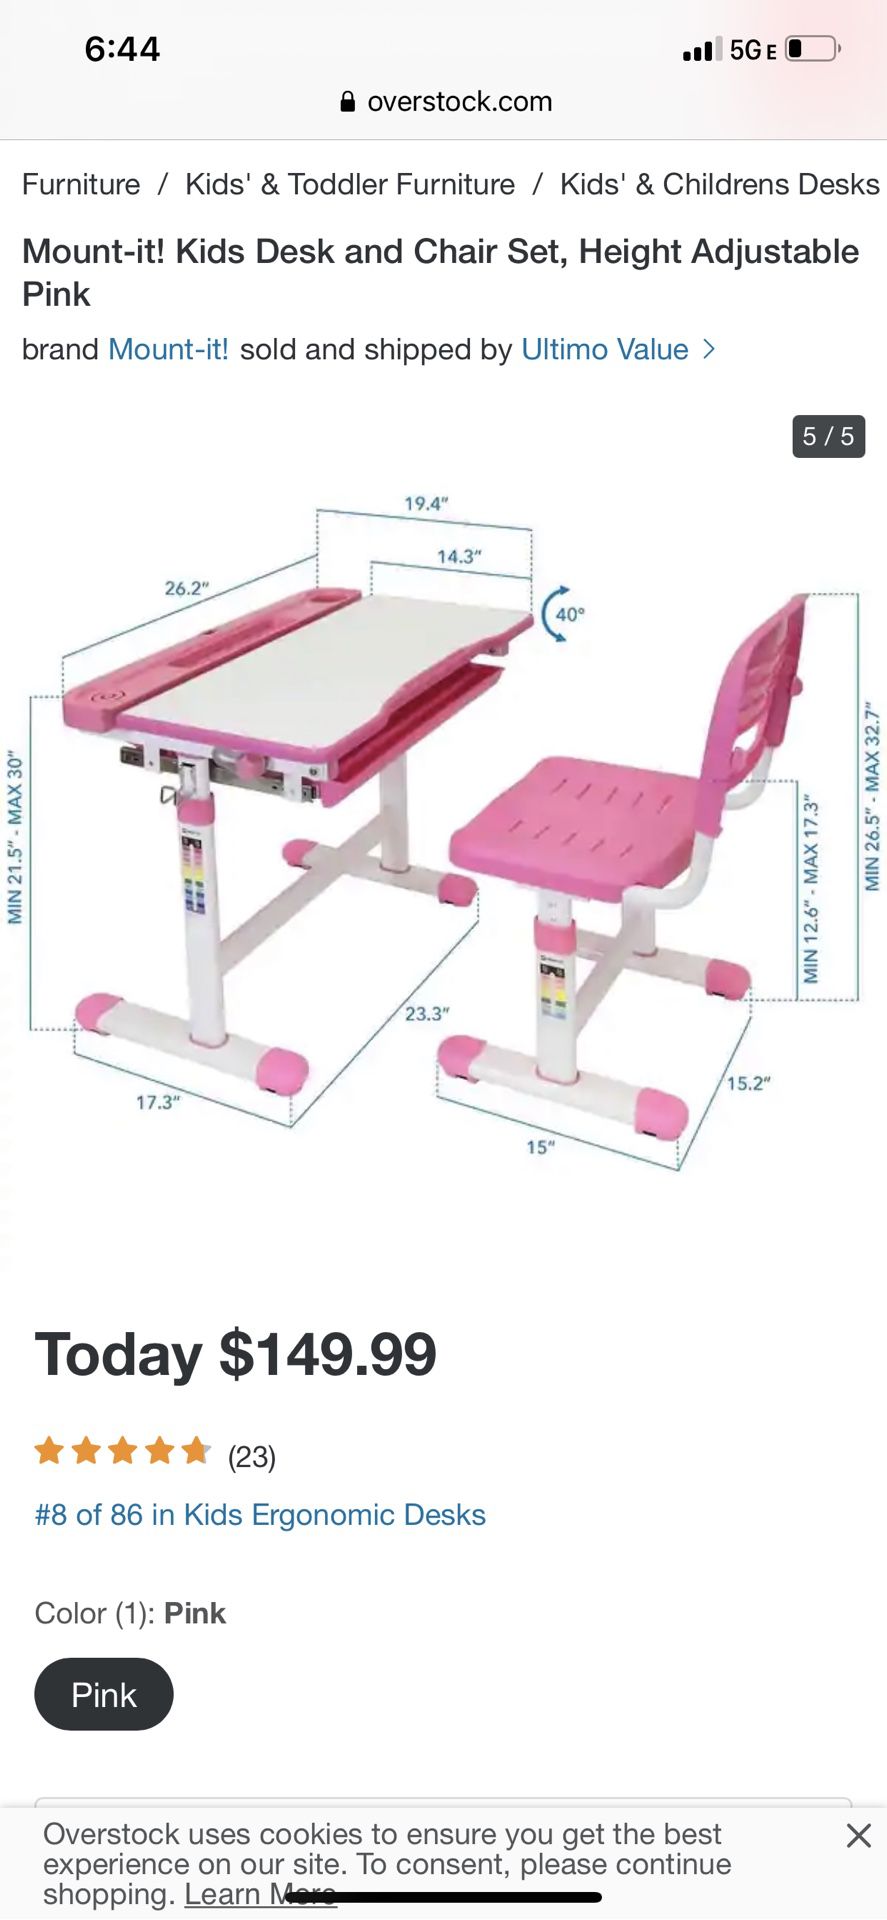 Child/Kid Desk and Chair